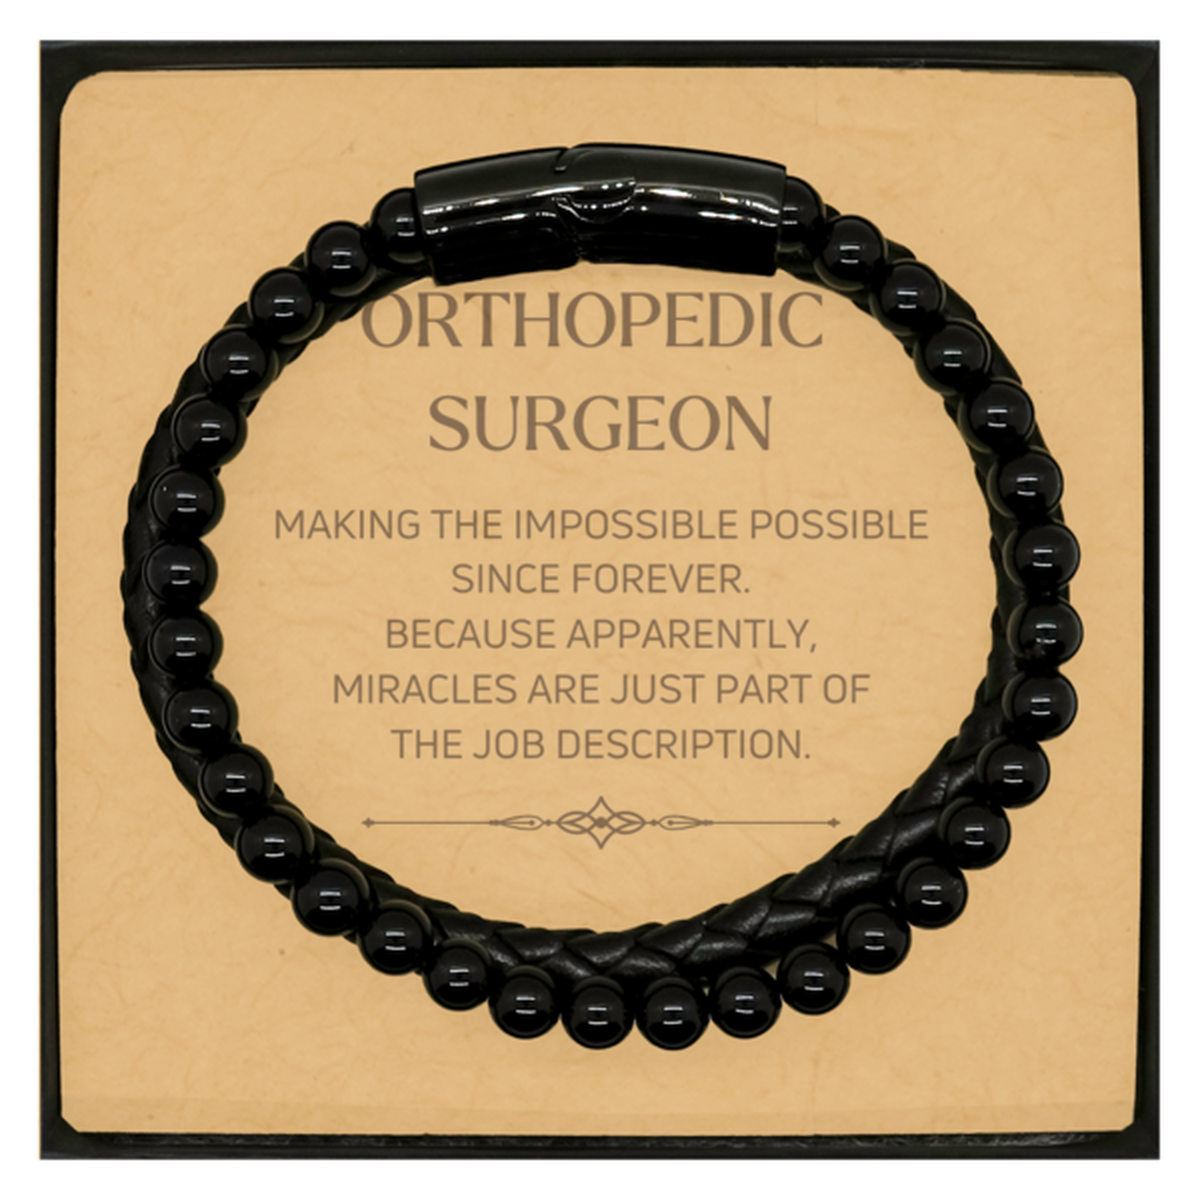 Funny Orthopedic Surgeon Gifts, Miracles are just part of the job description, Inspirational Birthday Christmas Stone Leather Bracelets For Orthopedic Surgeon, Men, Women, Coworkers, Friends, Boss